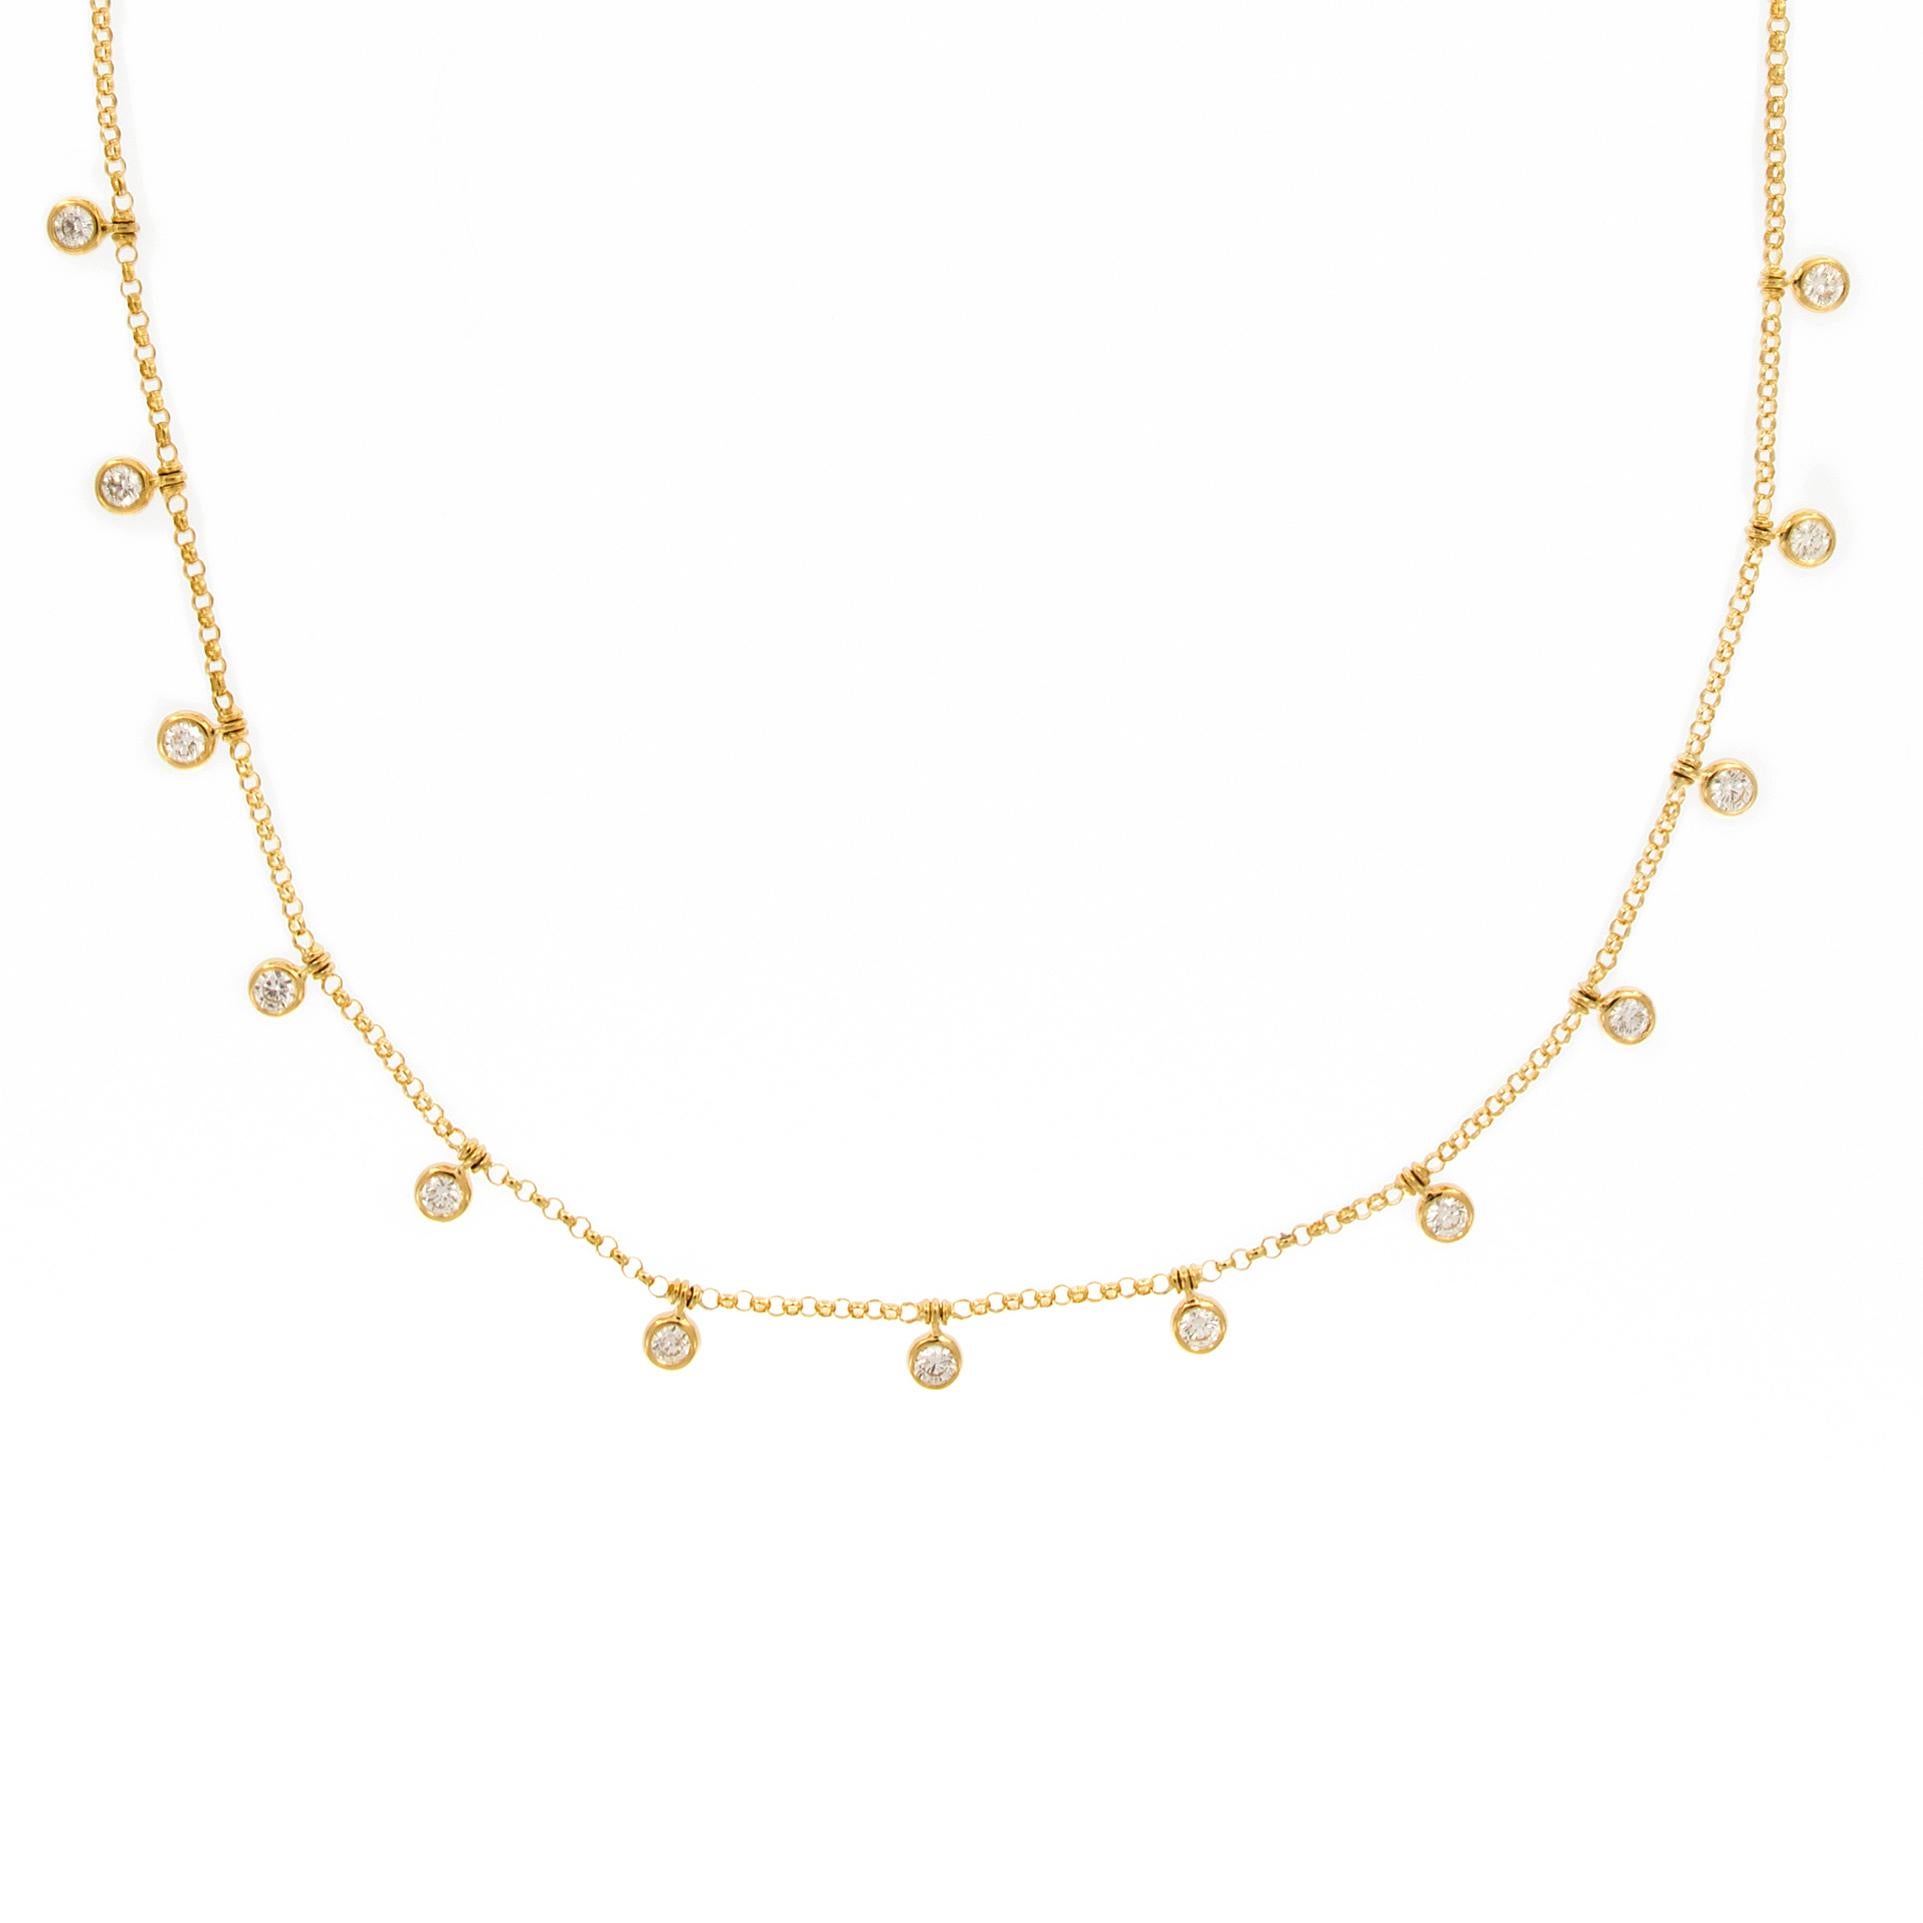 This necklace provides a touch of sparkle and sway. 18k yellow gold necklace features 13 bezel-set round brilliant-cut diamonds that dangle from an 16-1 7 inch chain. Weighs 6.5 grams.

Diamonds 1.04 cttw